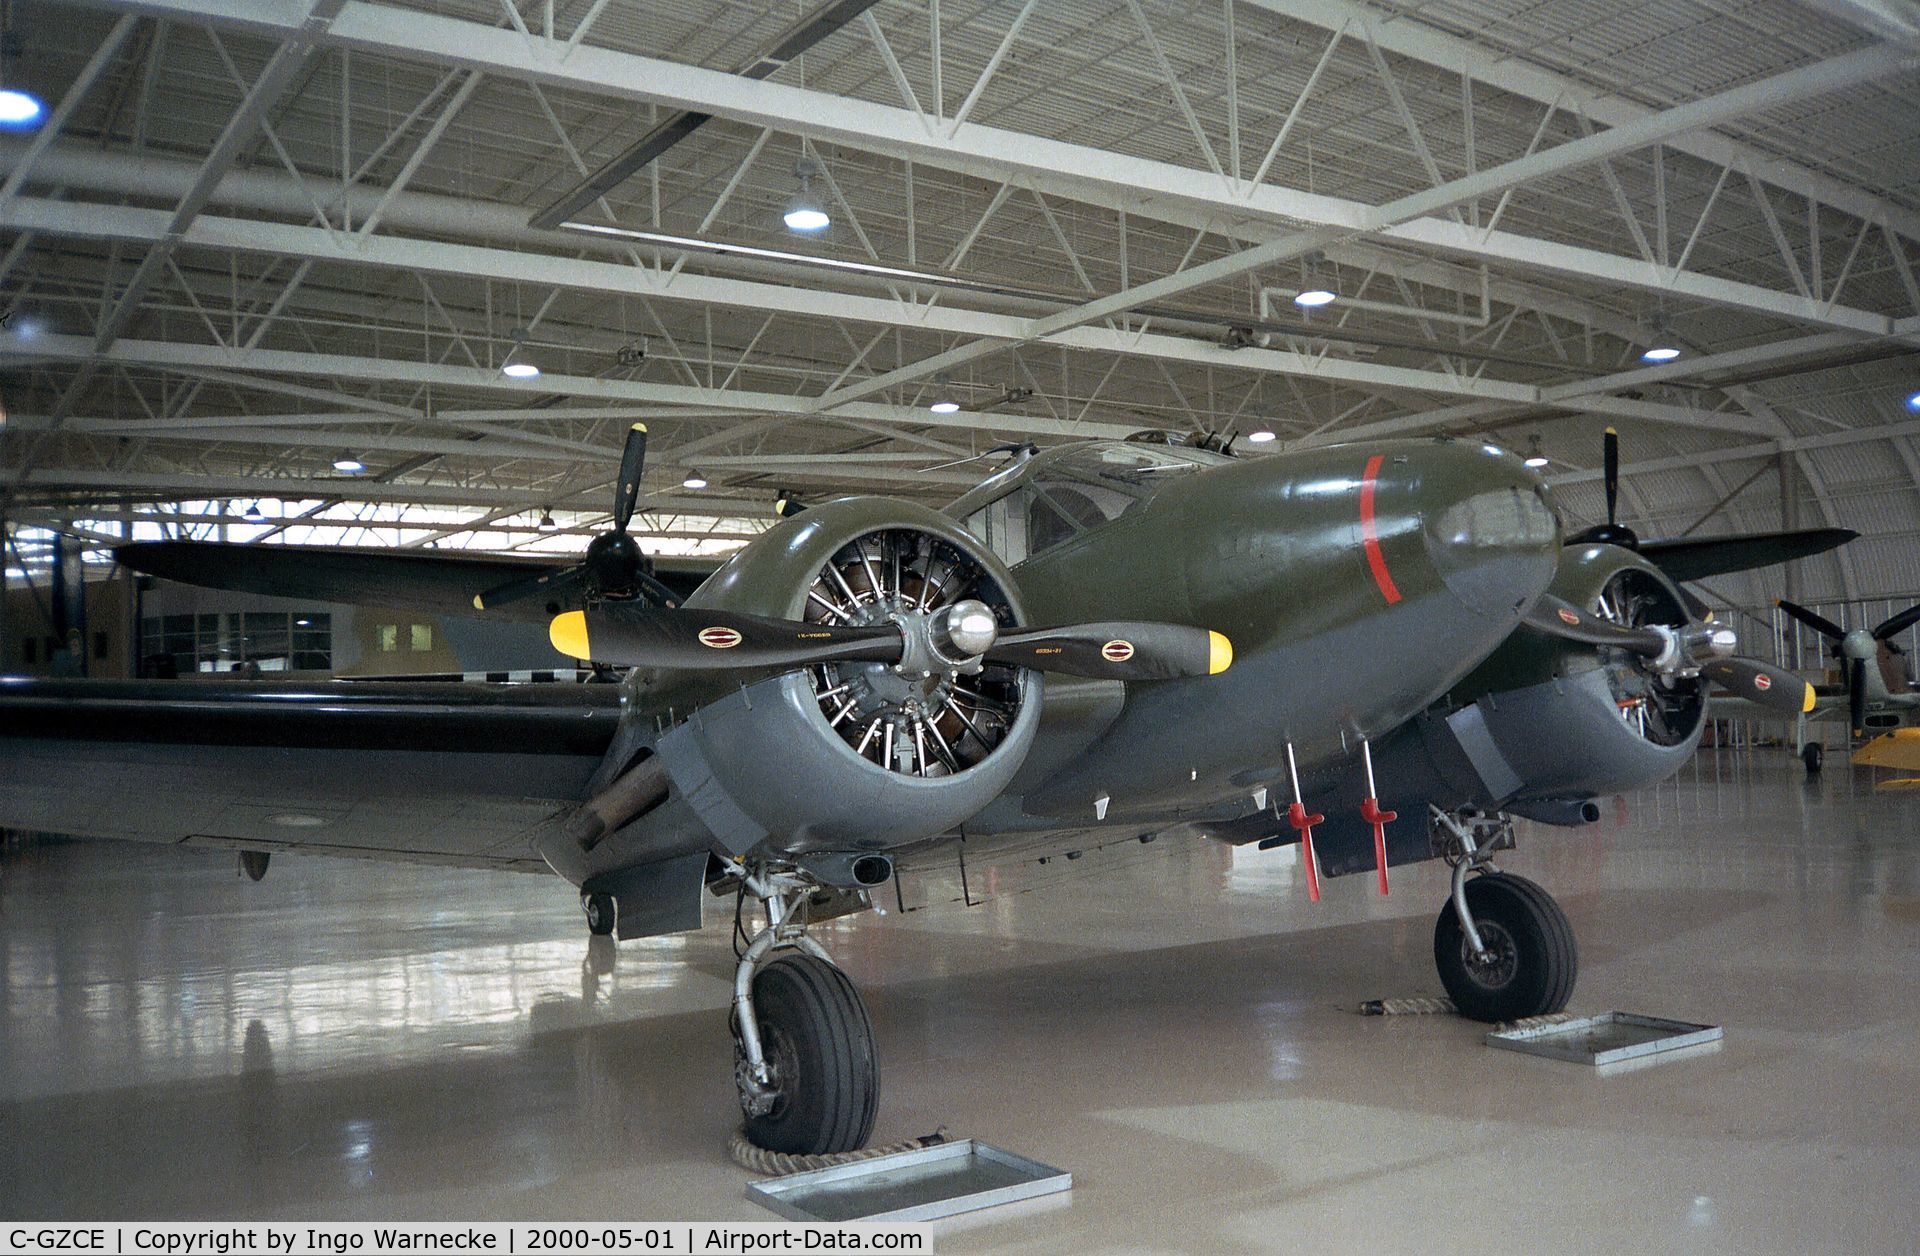 C-GZCE, 1946 Beech D18S C/N A-156, Beechcraft E18S (ex D18C) Twin Beech shown in the markings of a RCAF C45 Expeditor at the Canadian Warplane Heritage Museum, Hamilton Ontario